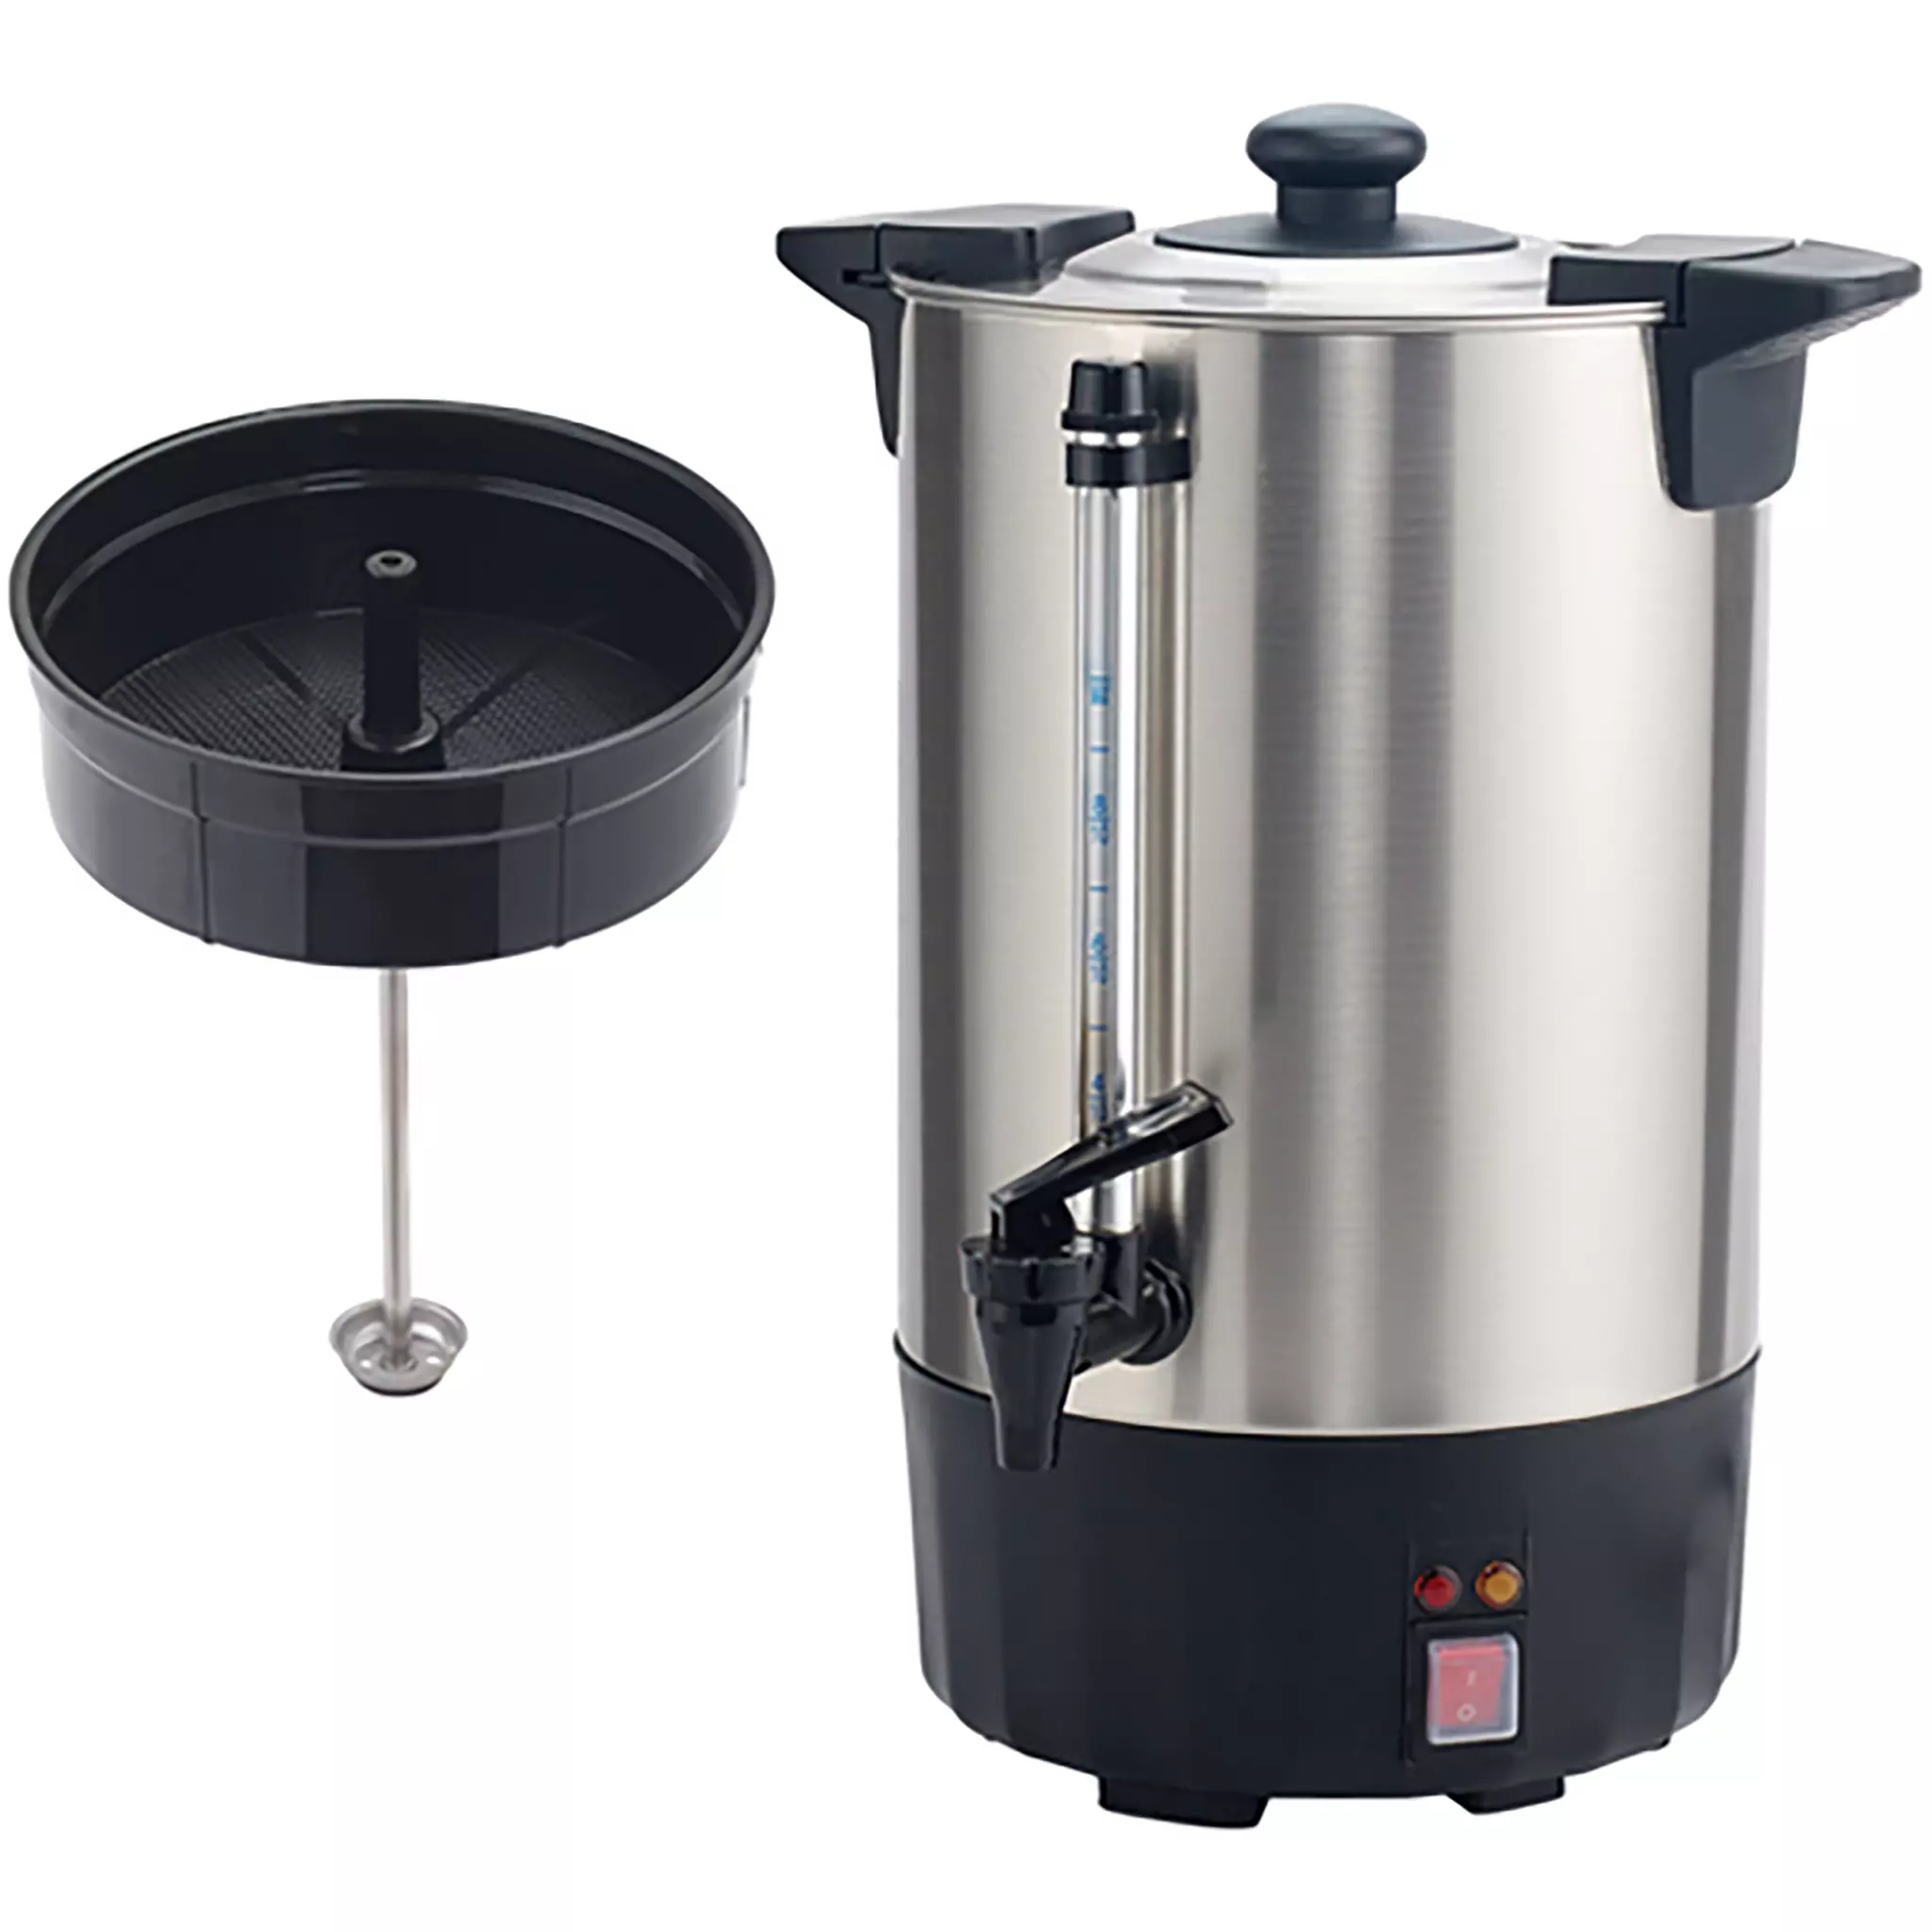 Shabbat Electric Thermo Pot For Instant Boiling Water